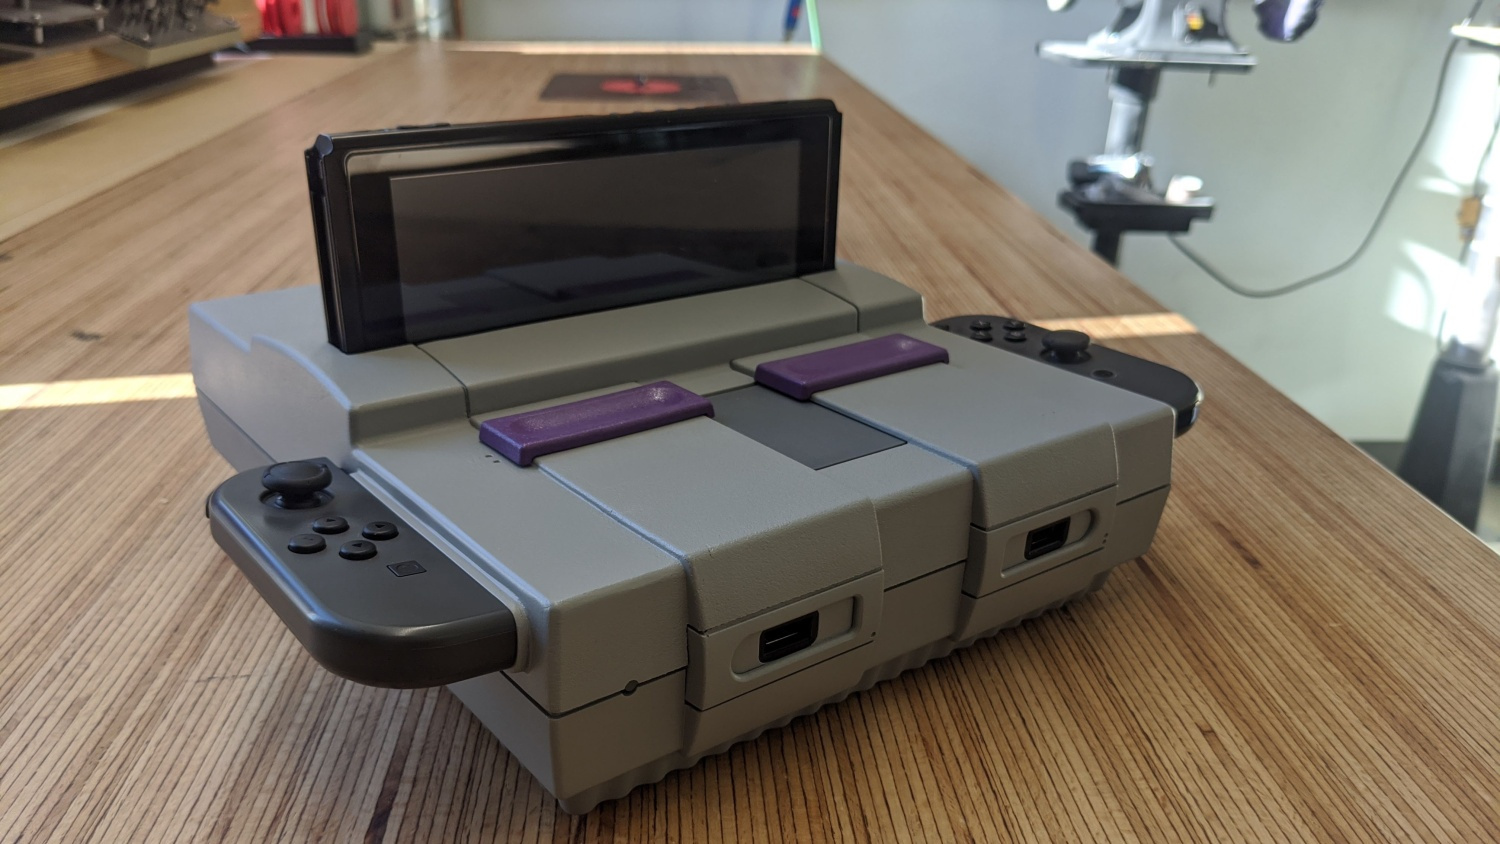 snes edition switch